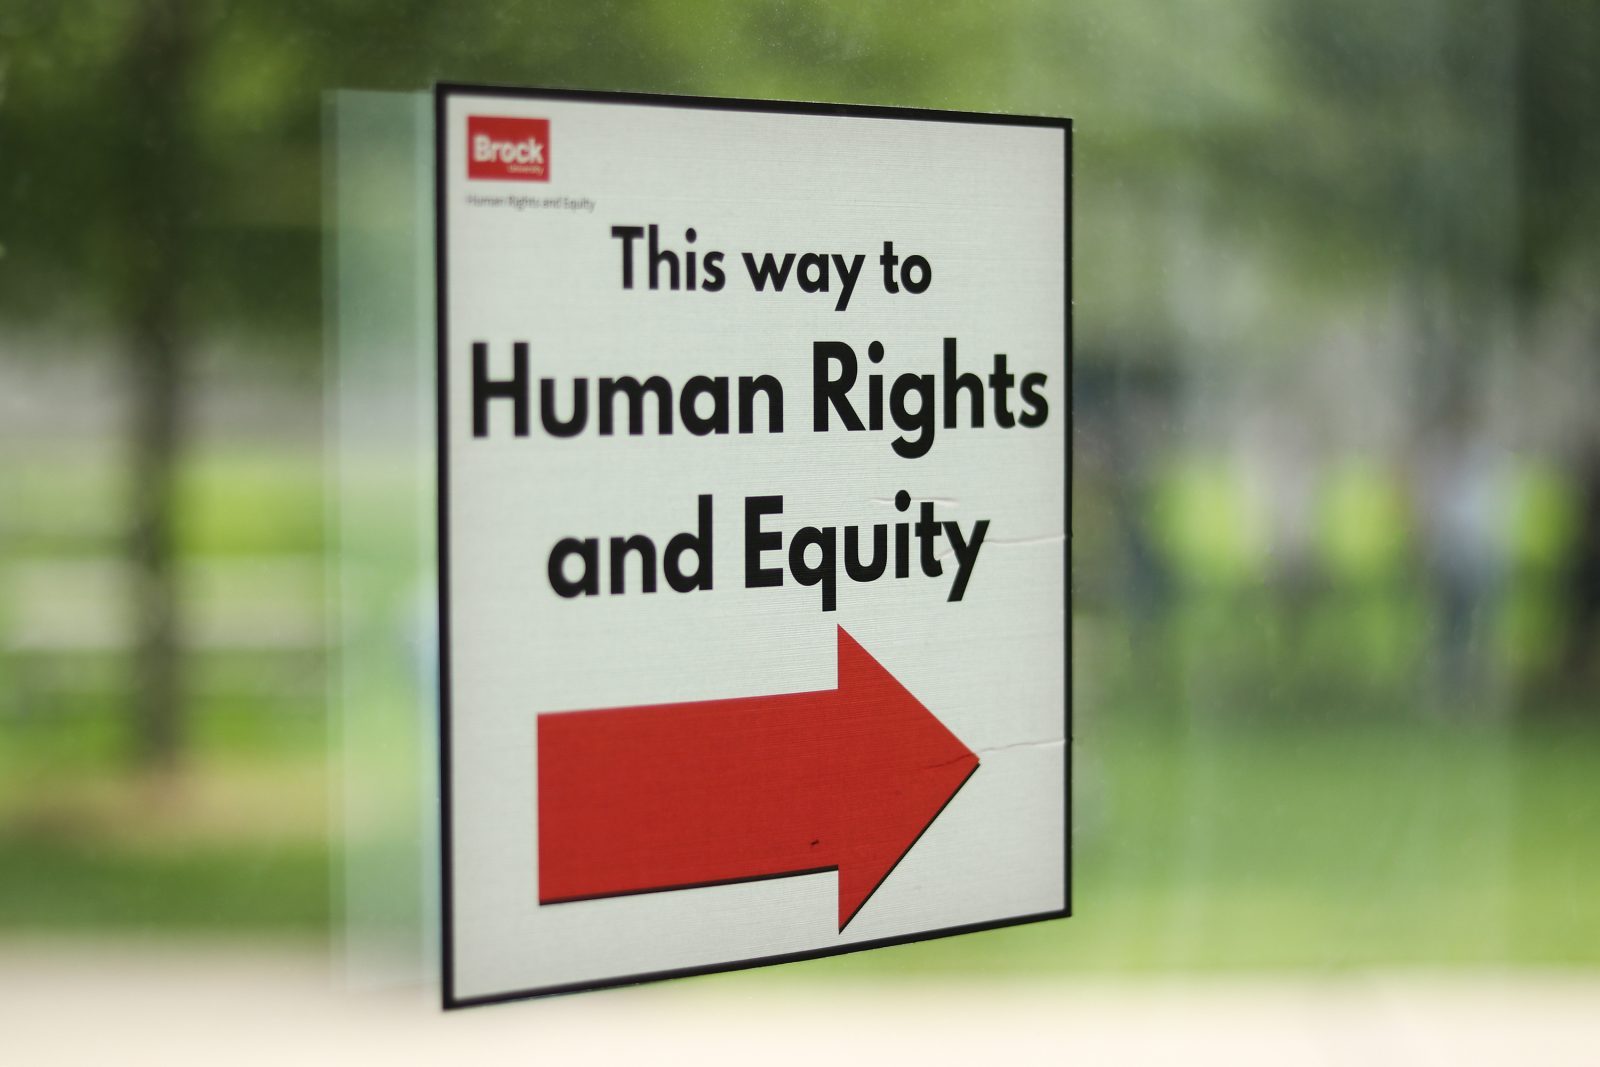 A sign on a window reads 'This way to Human Rights and Equity.'